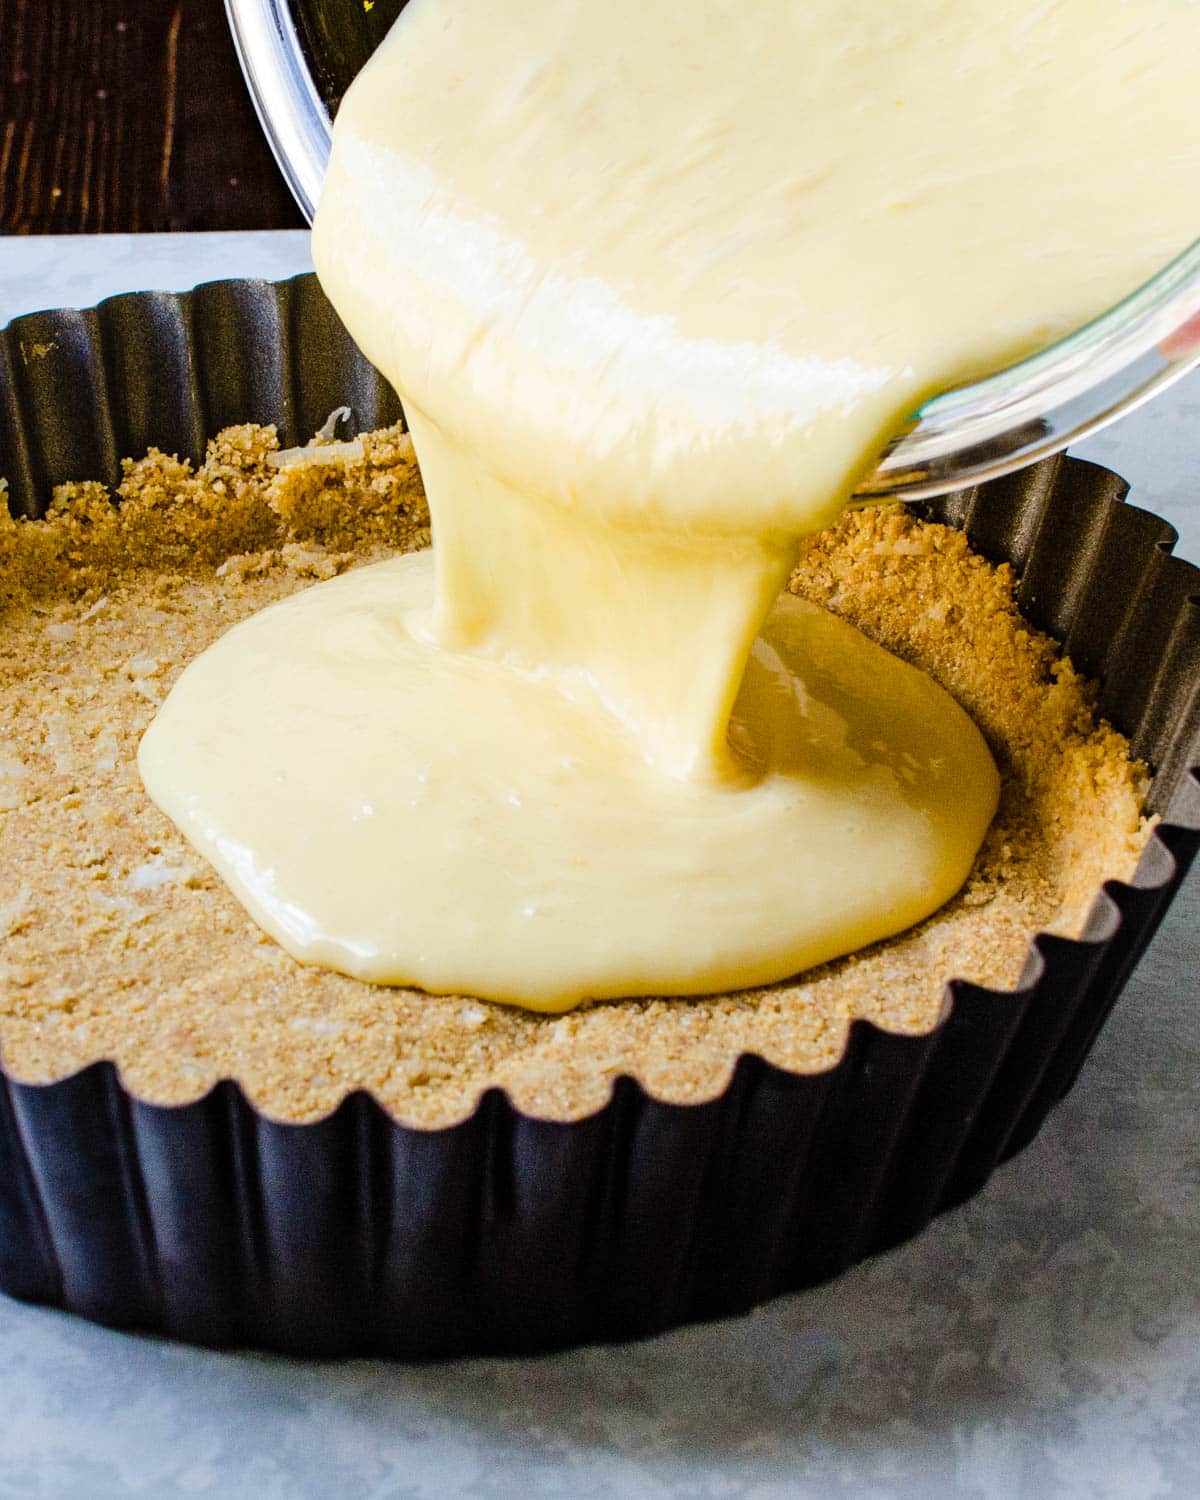 Pouring the pie filling into the prepared graham cracker crust.